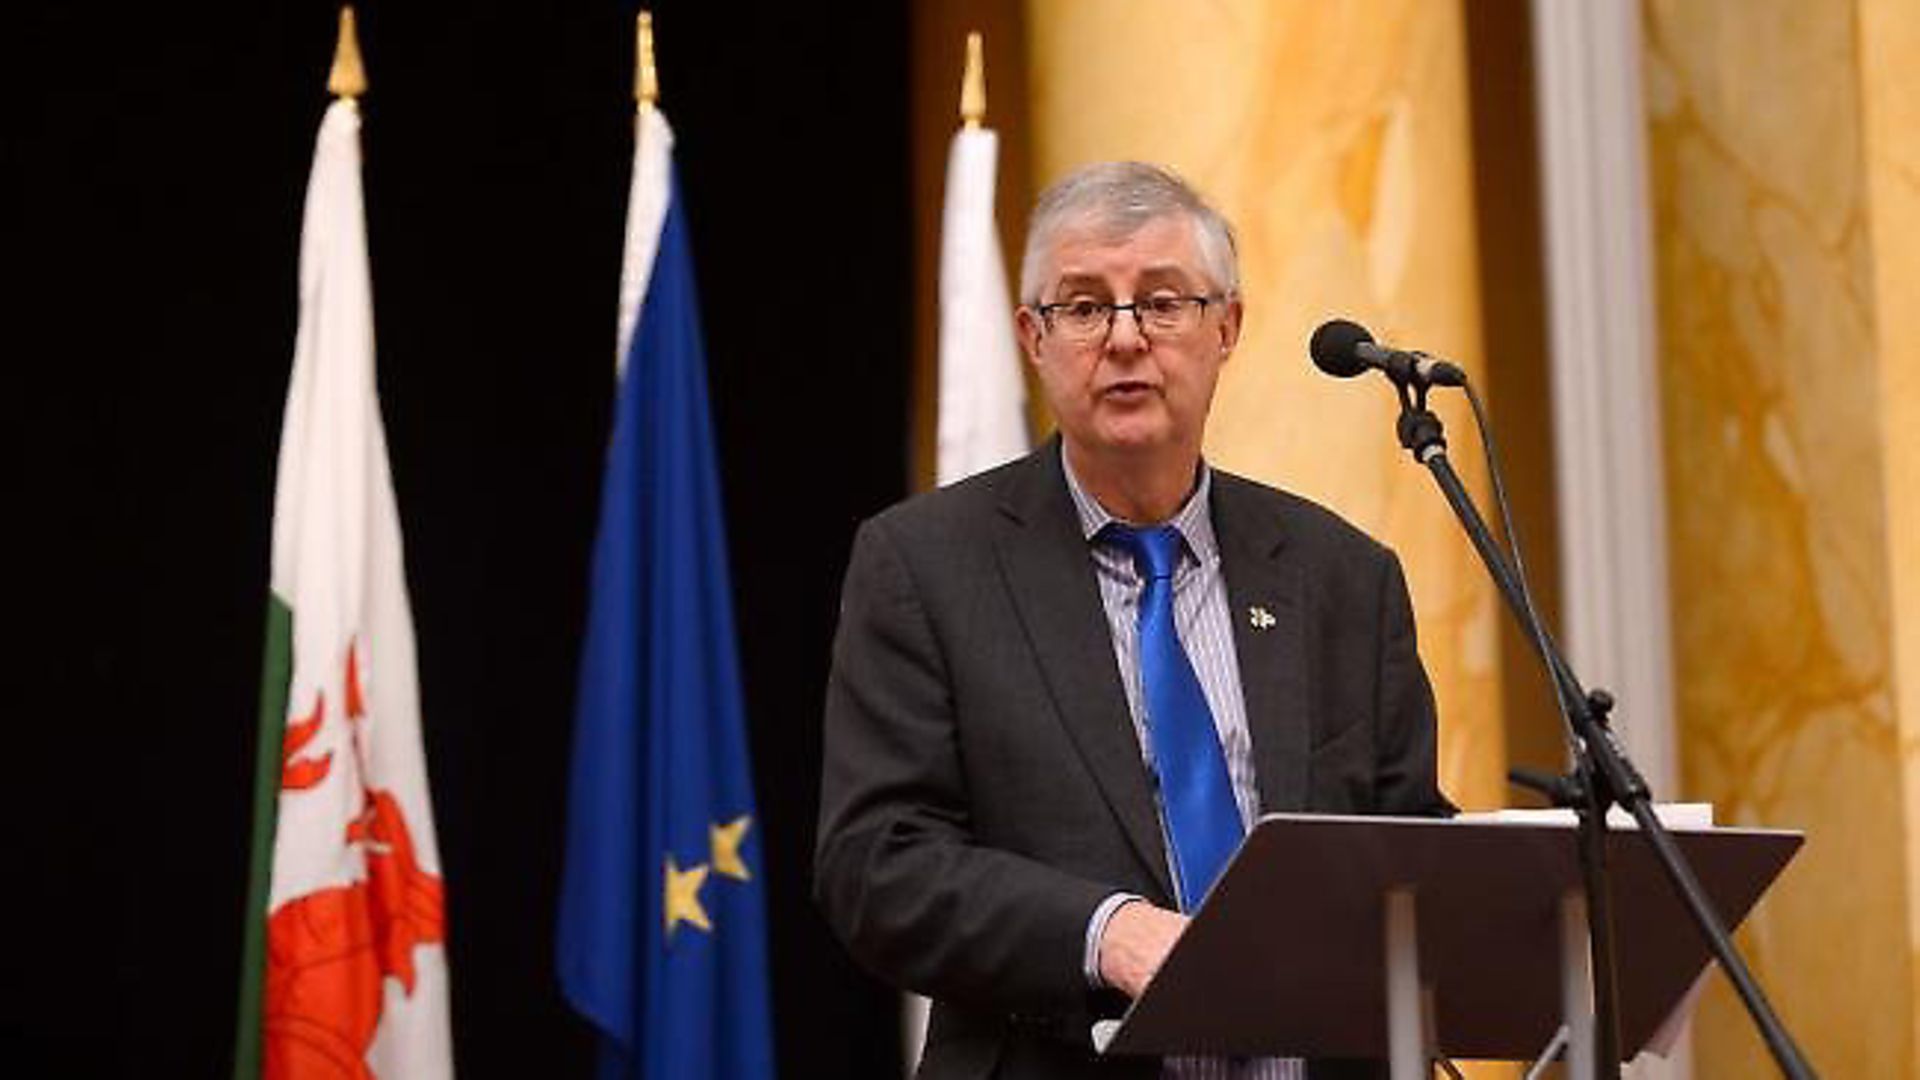 Mark Drakeford appears in front of a European flag. Photograph: CPMR/Flickr. - Credit: Archant